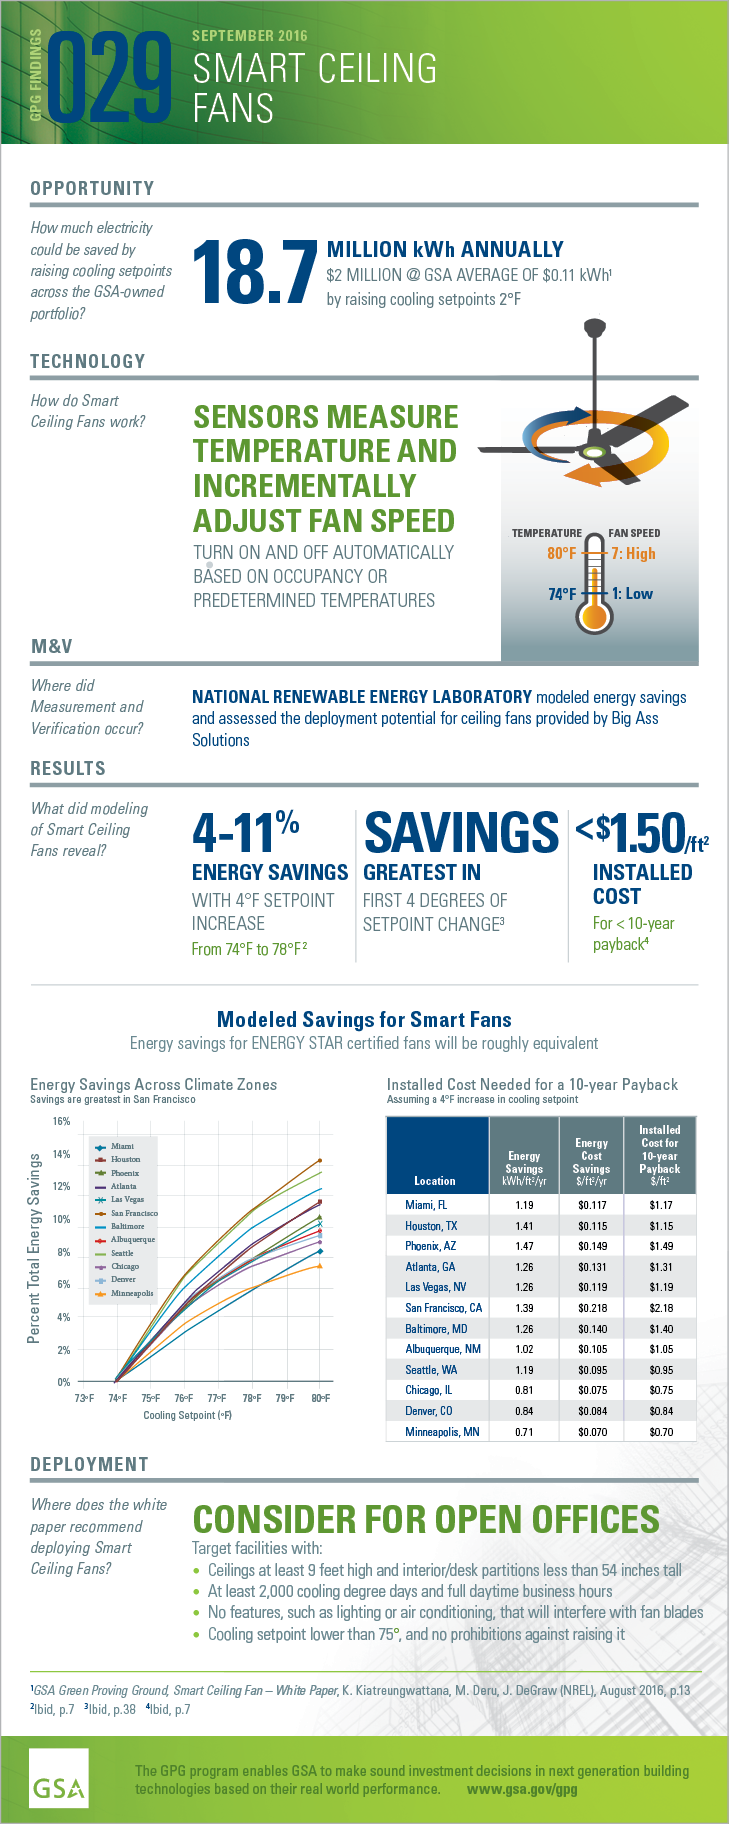 Download the PDF of the full-size infographic for GPG029 Smart Ceiling Fans.